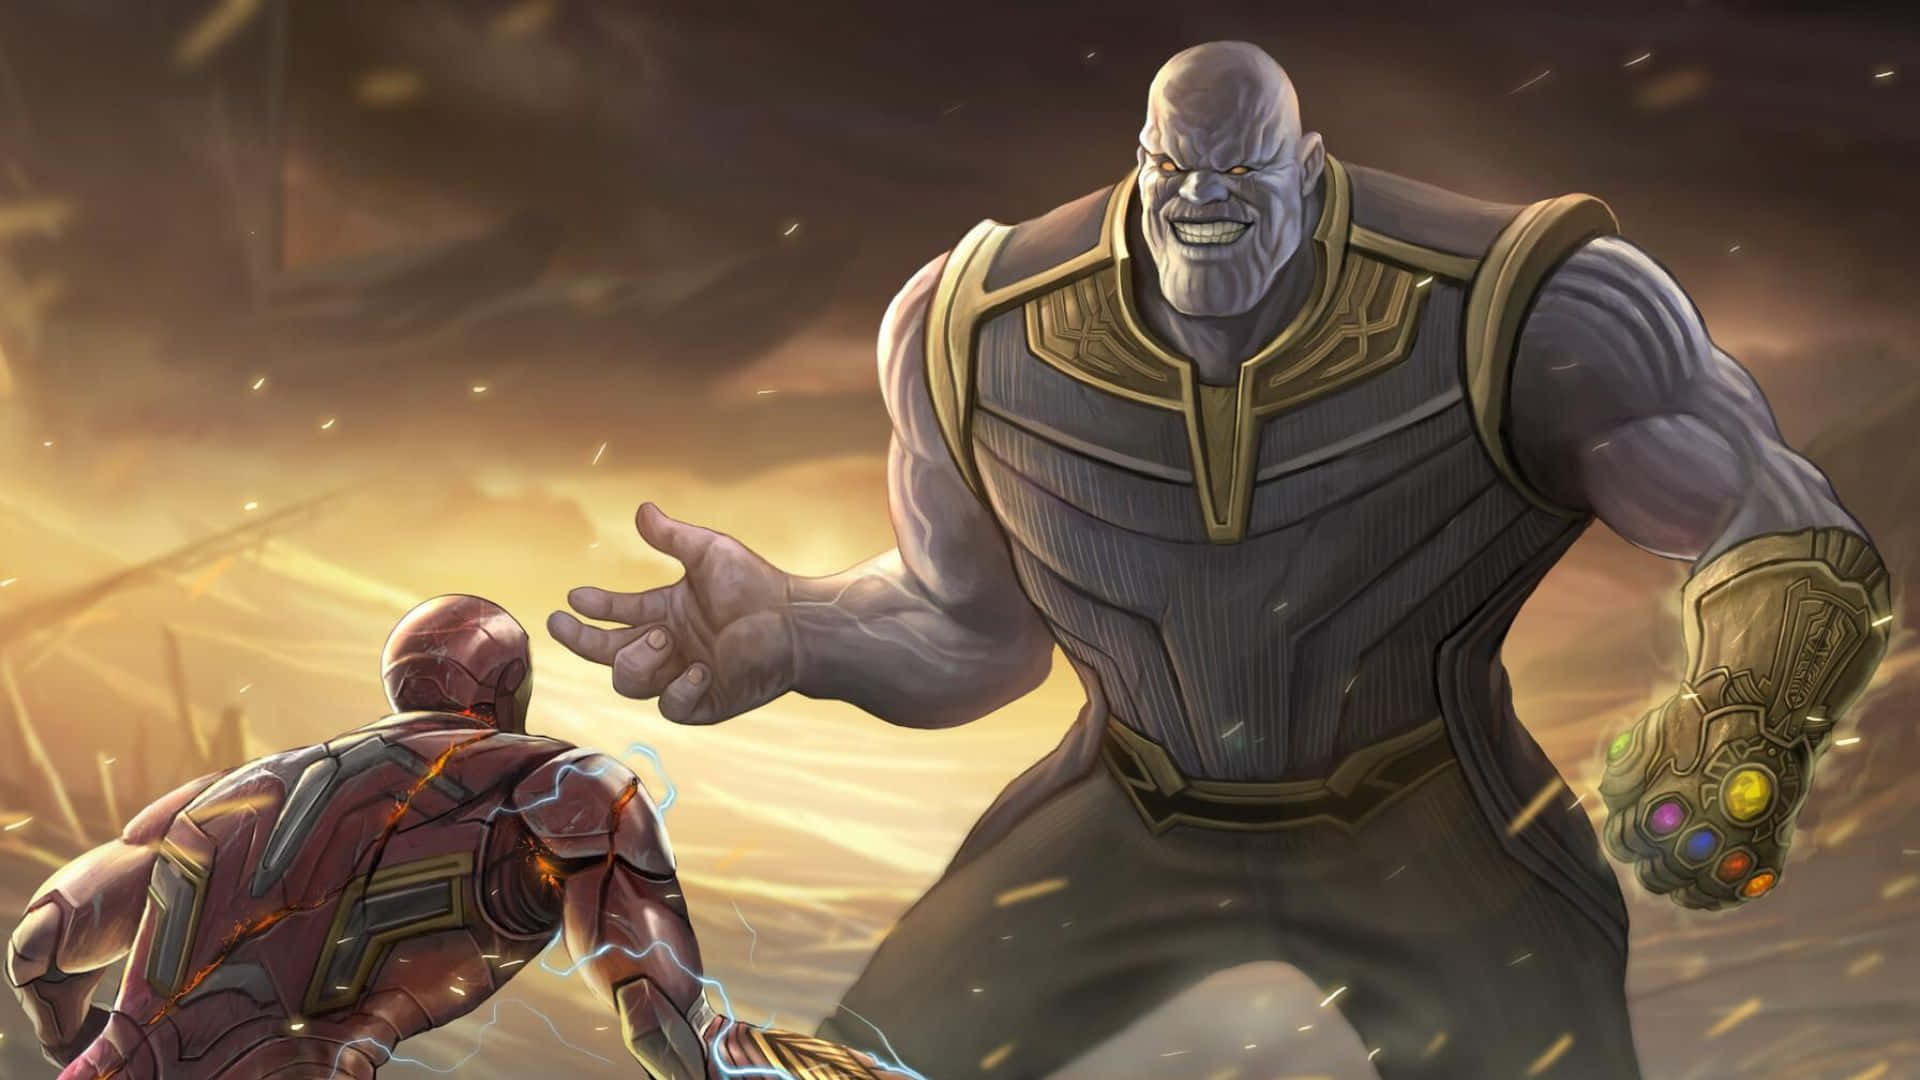 “Iron Man and Thanos Engaged in Epic Battle” Wallpaper